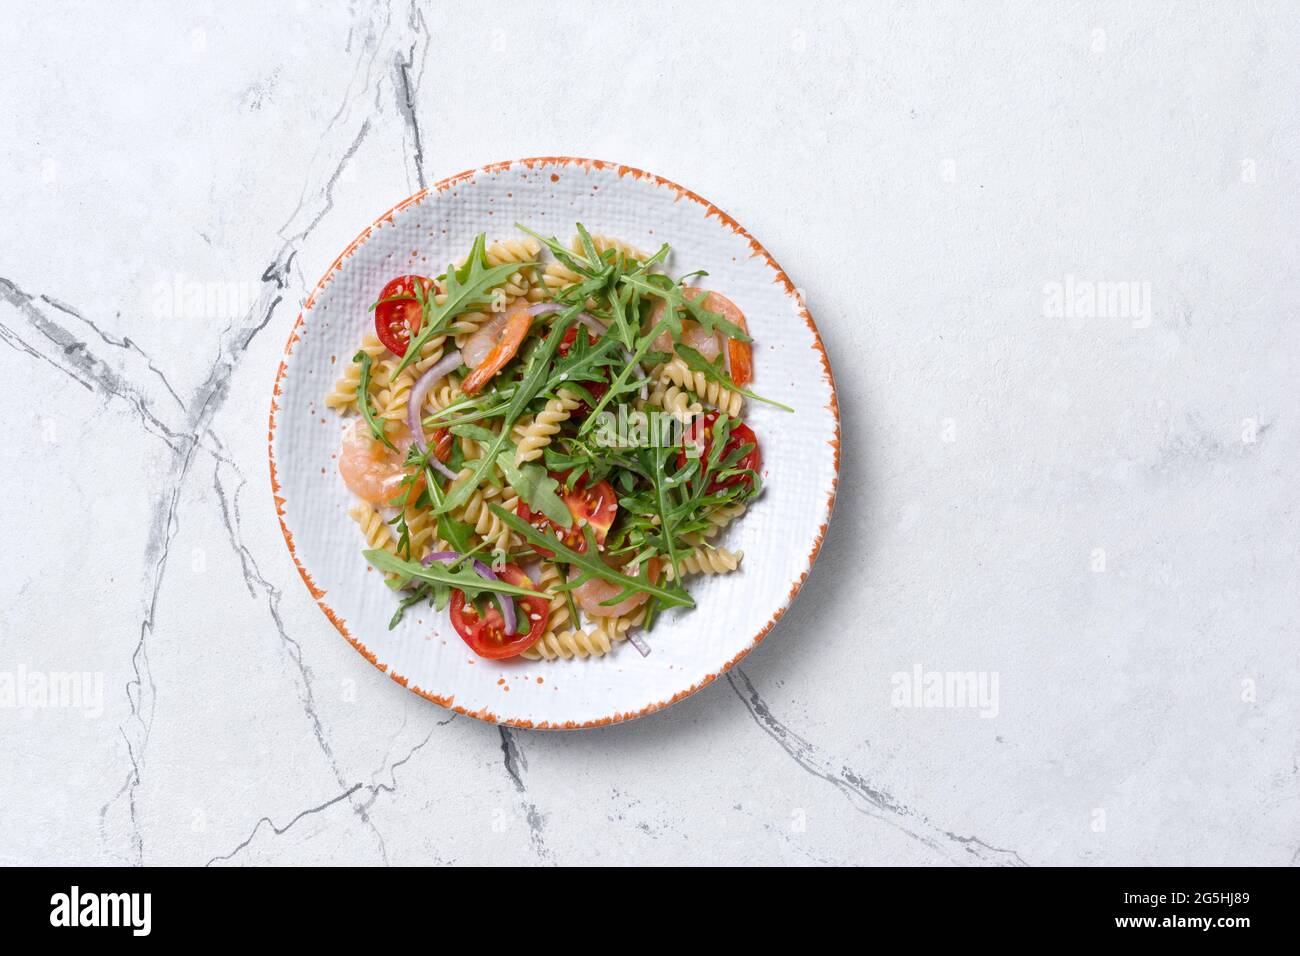 Top view of tasty pasta with shrimps, cherry tomatoes, onion, sesame and green arugula leaves on white marble background Stock Photo